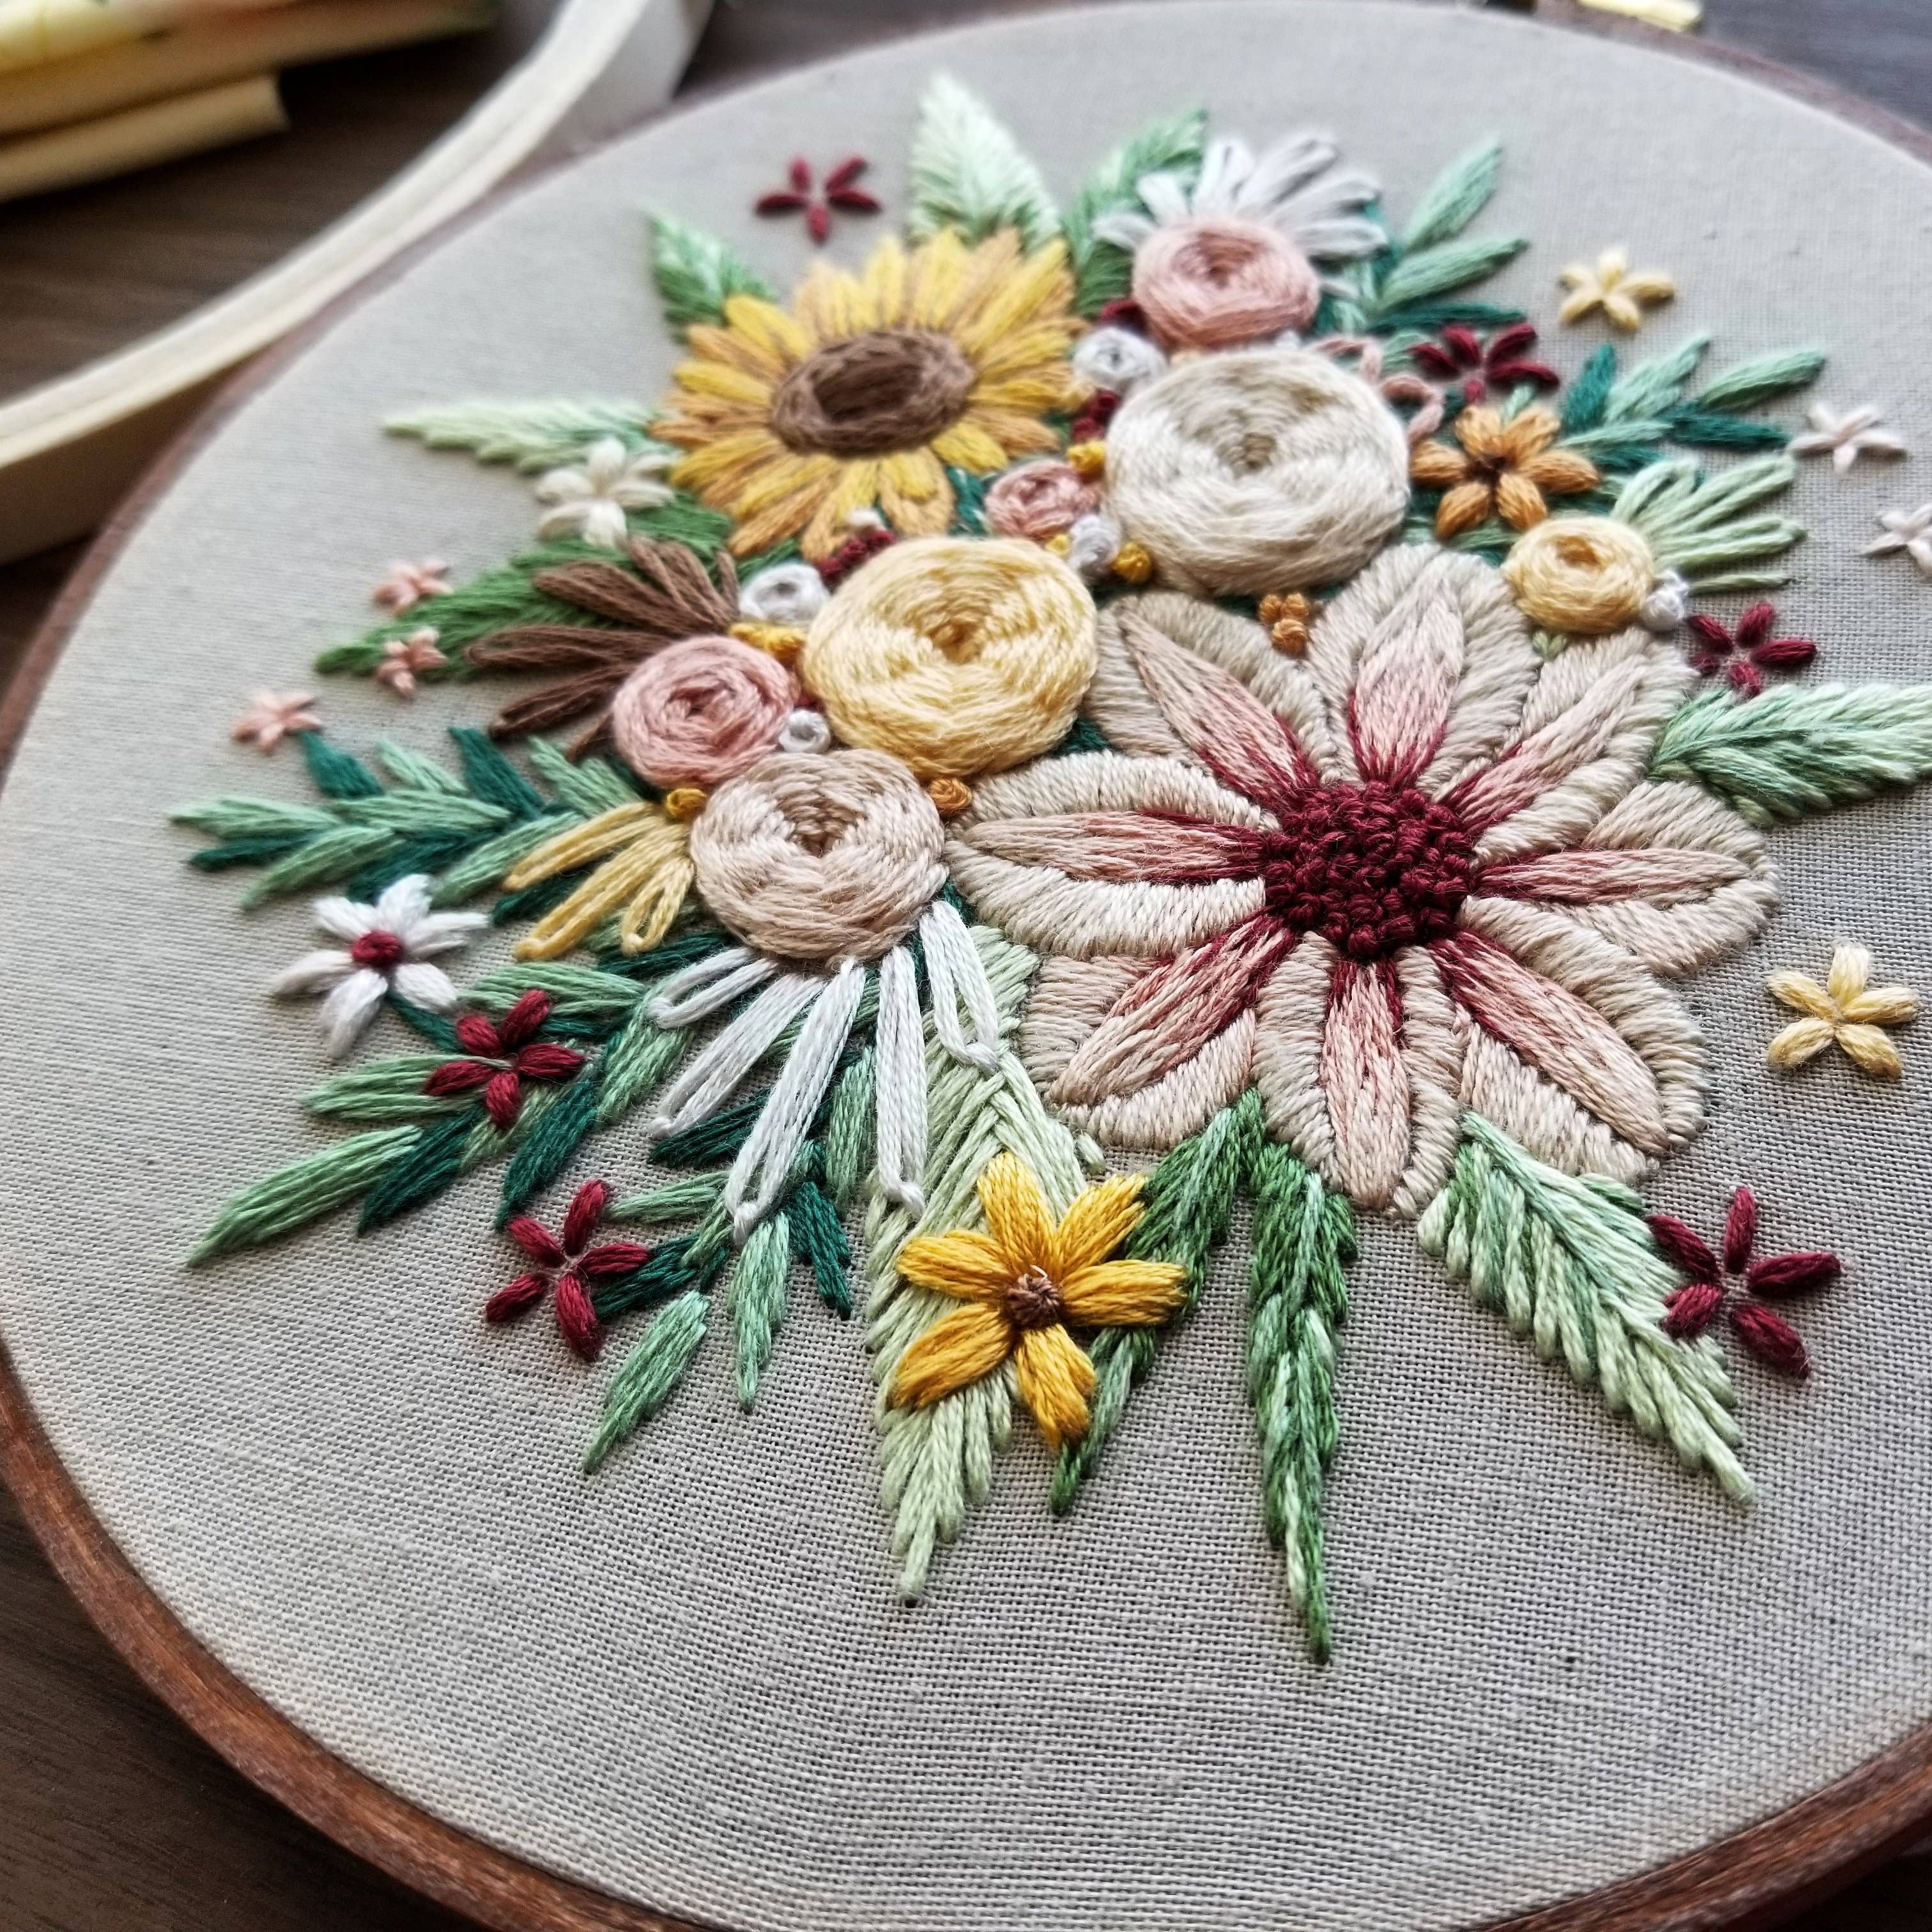 Light bulb flower and plant embroidery hoop